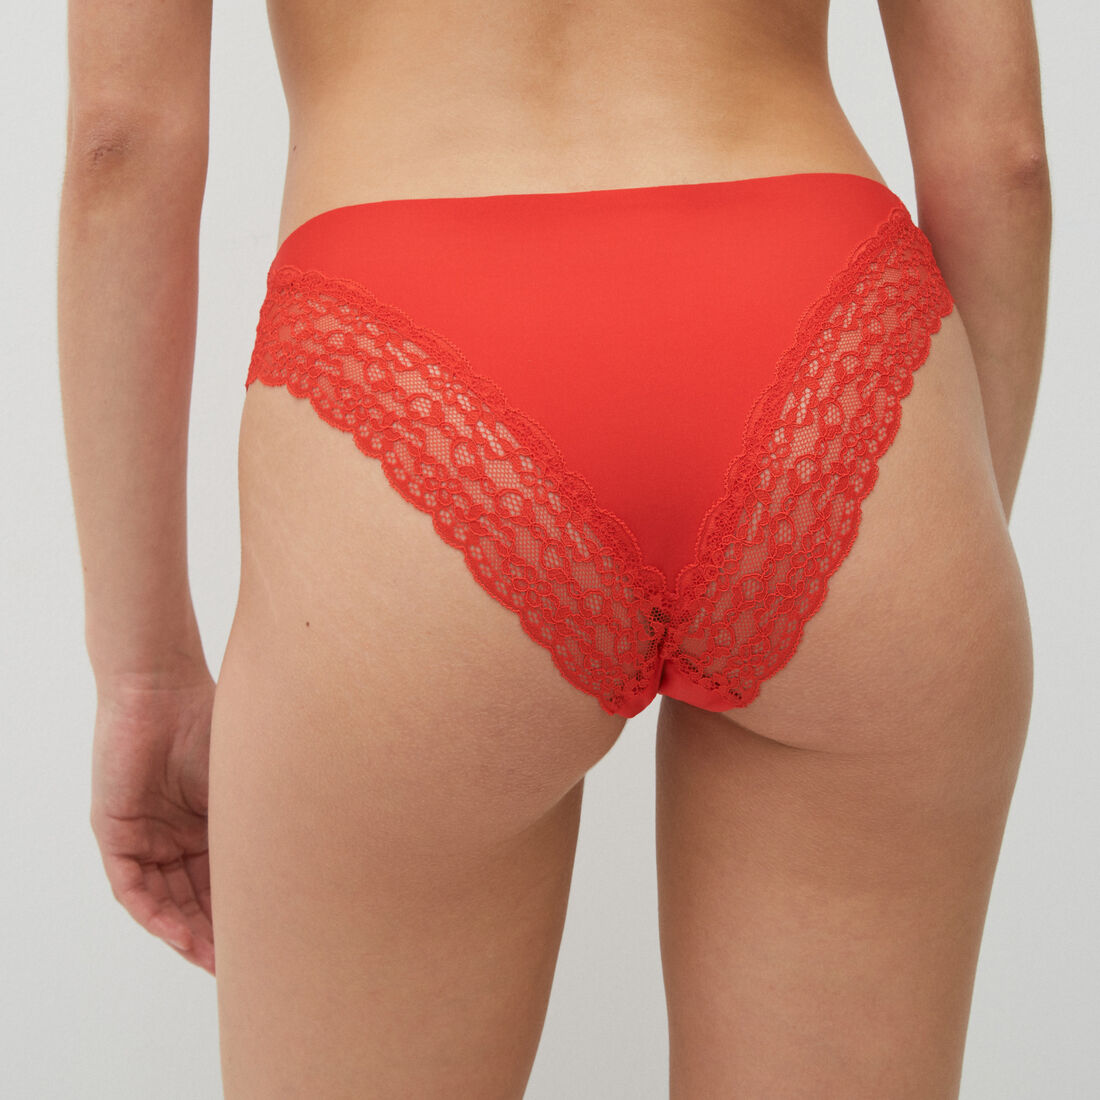 microfibre and lace briefs - red;